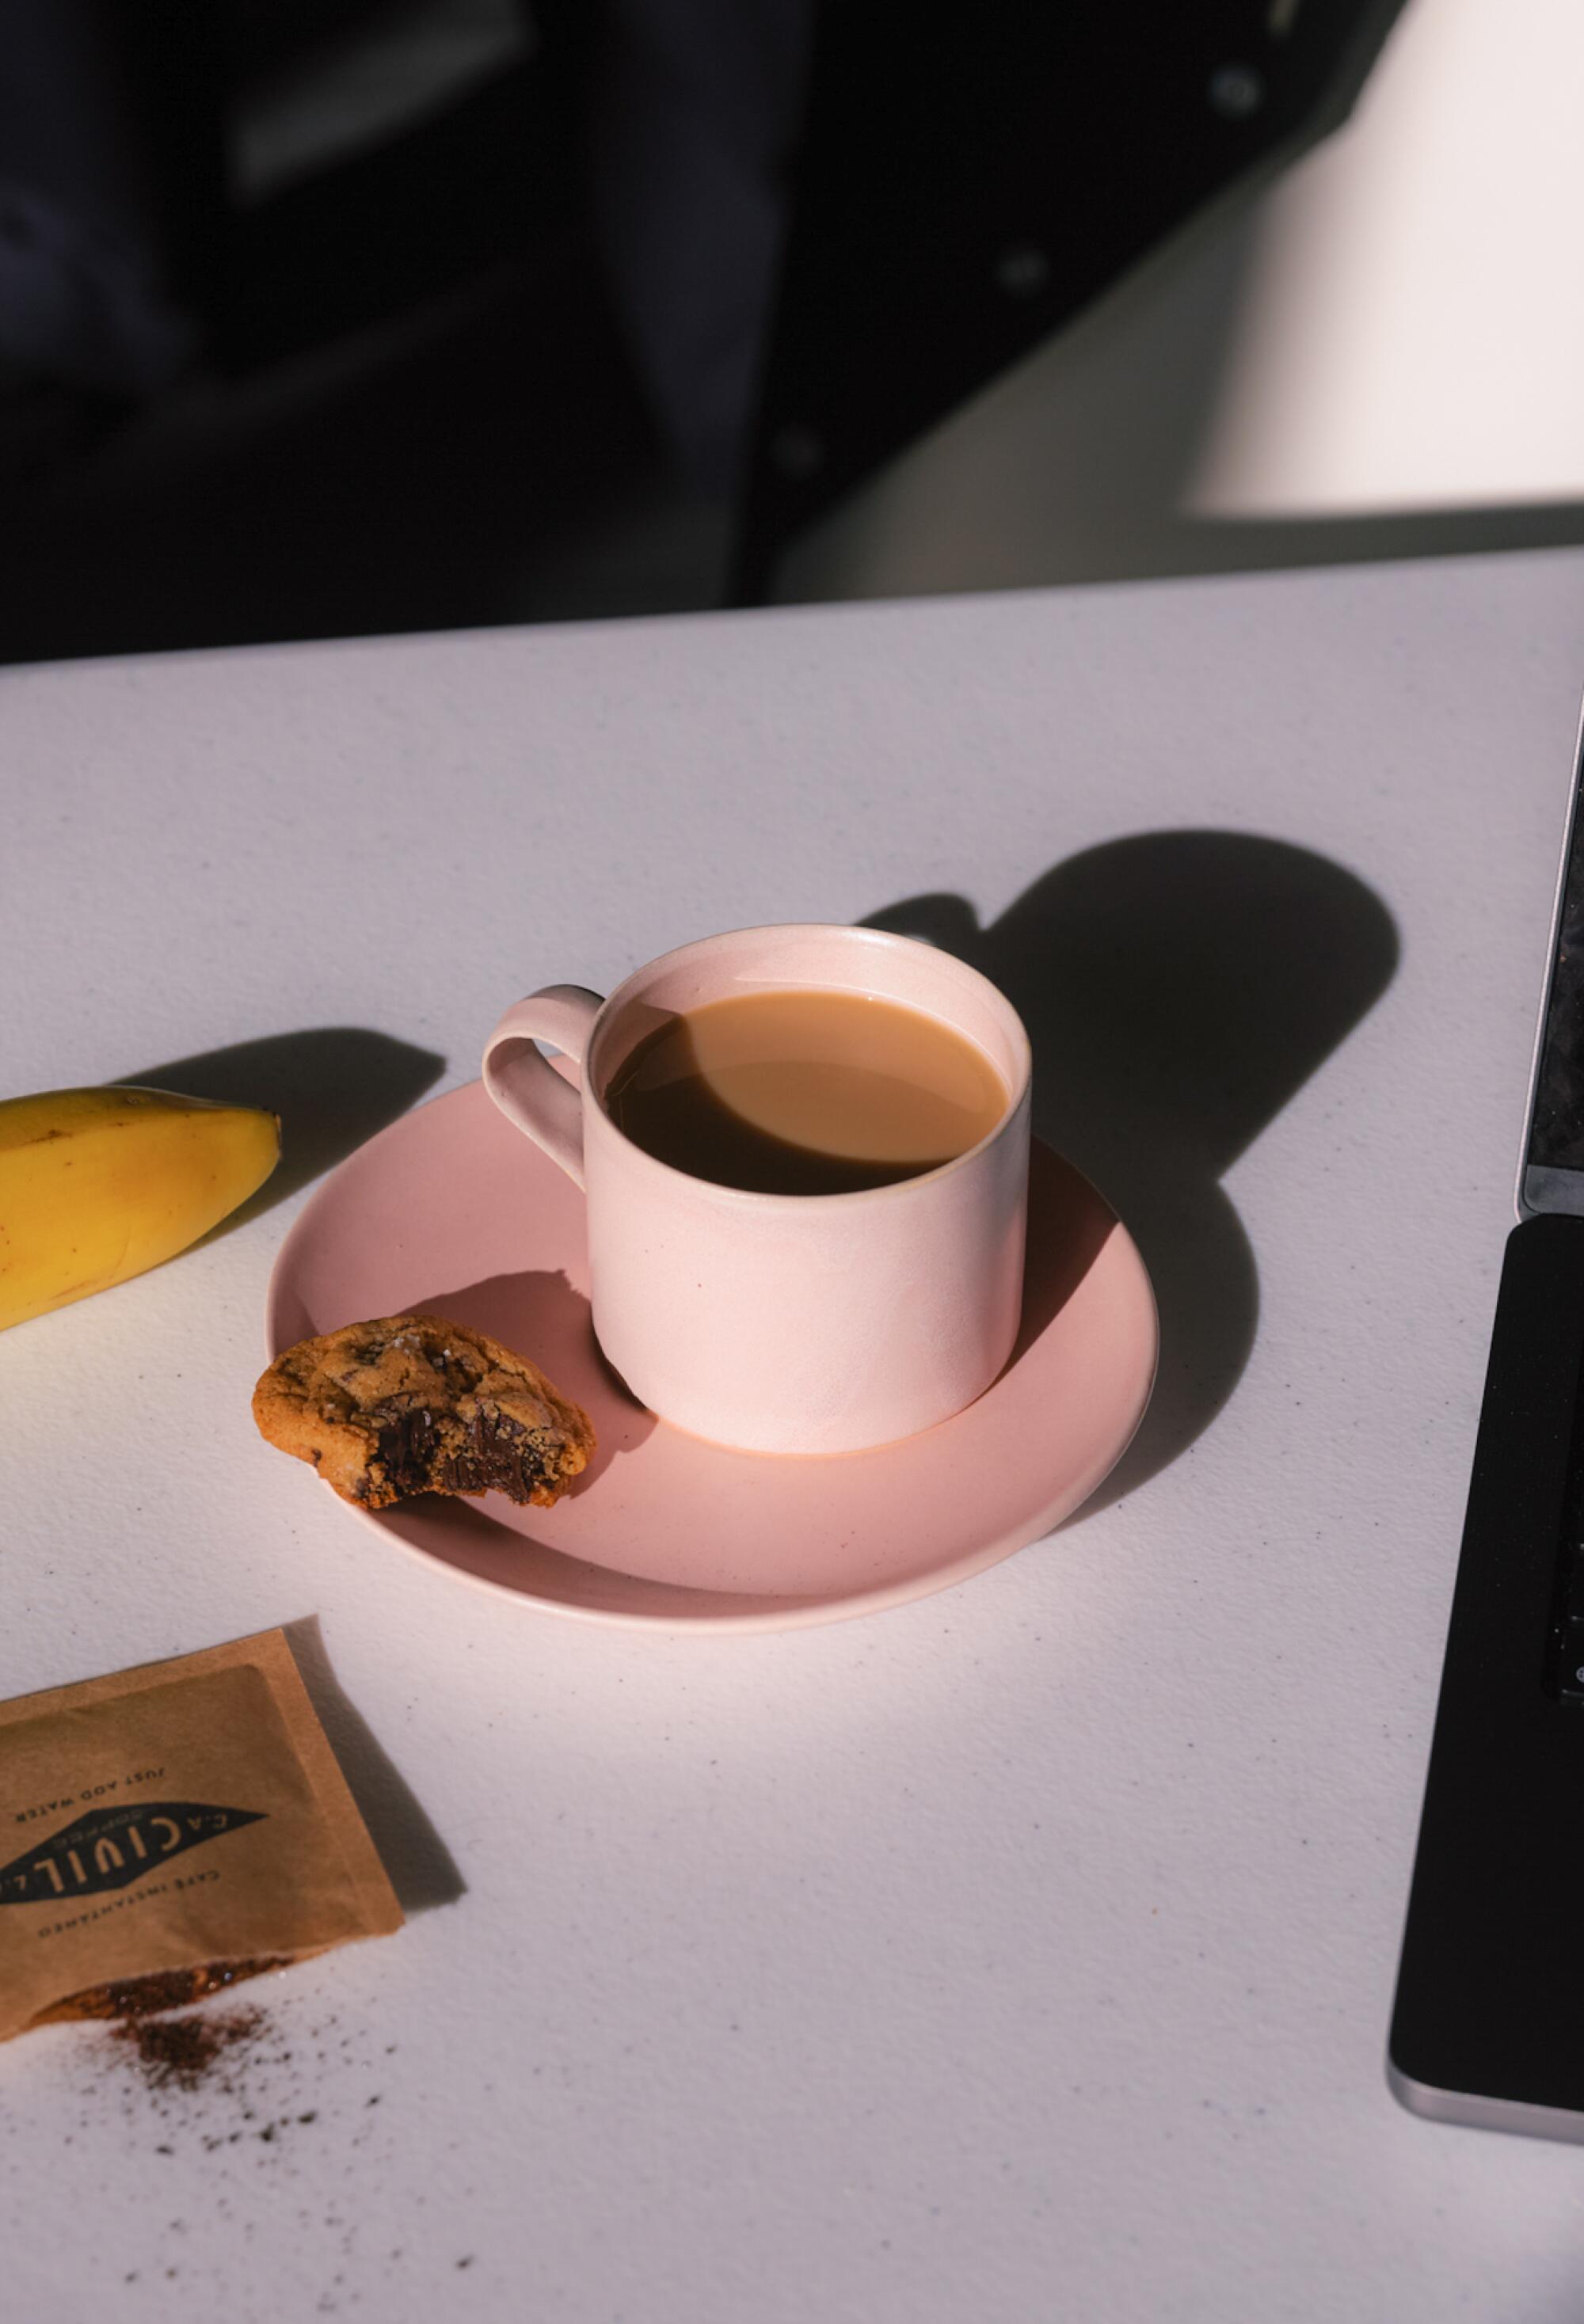 A coffee cup sits on a tabletop in a breakfast scene.